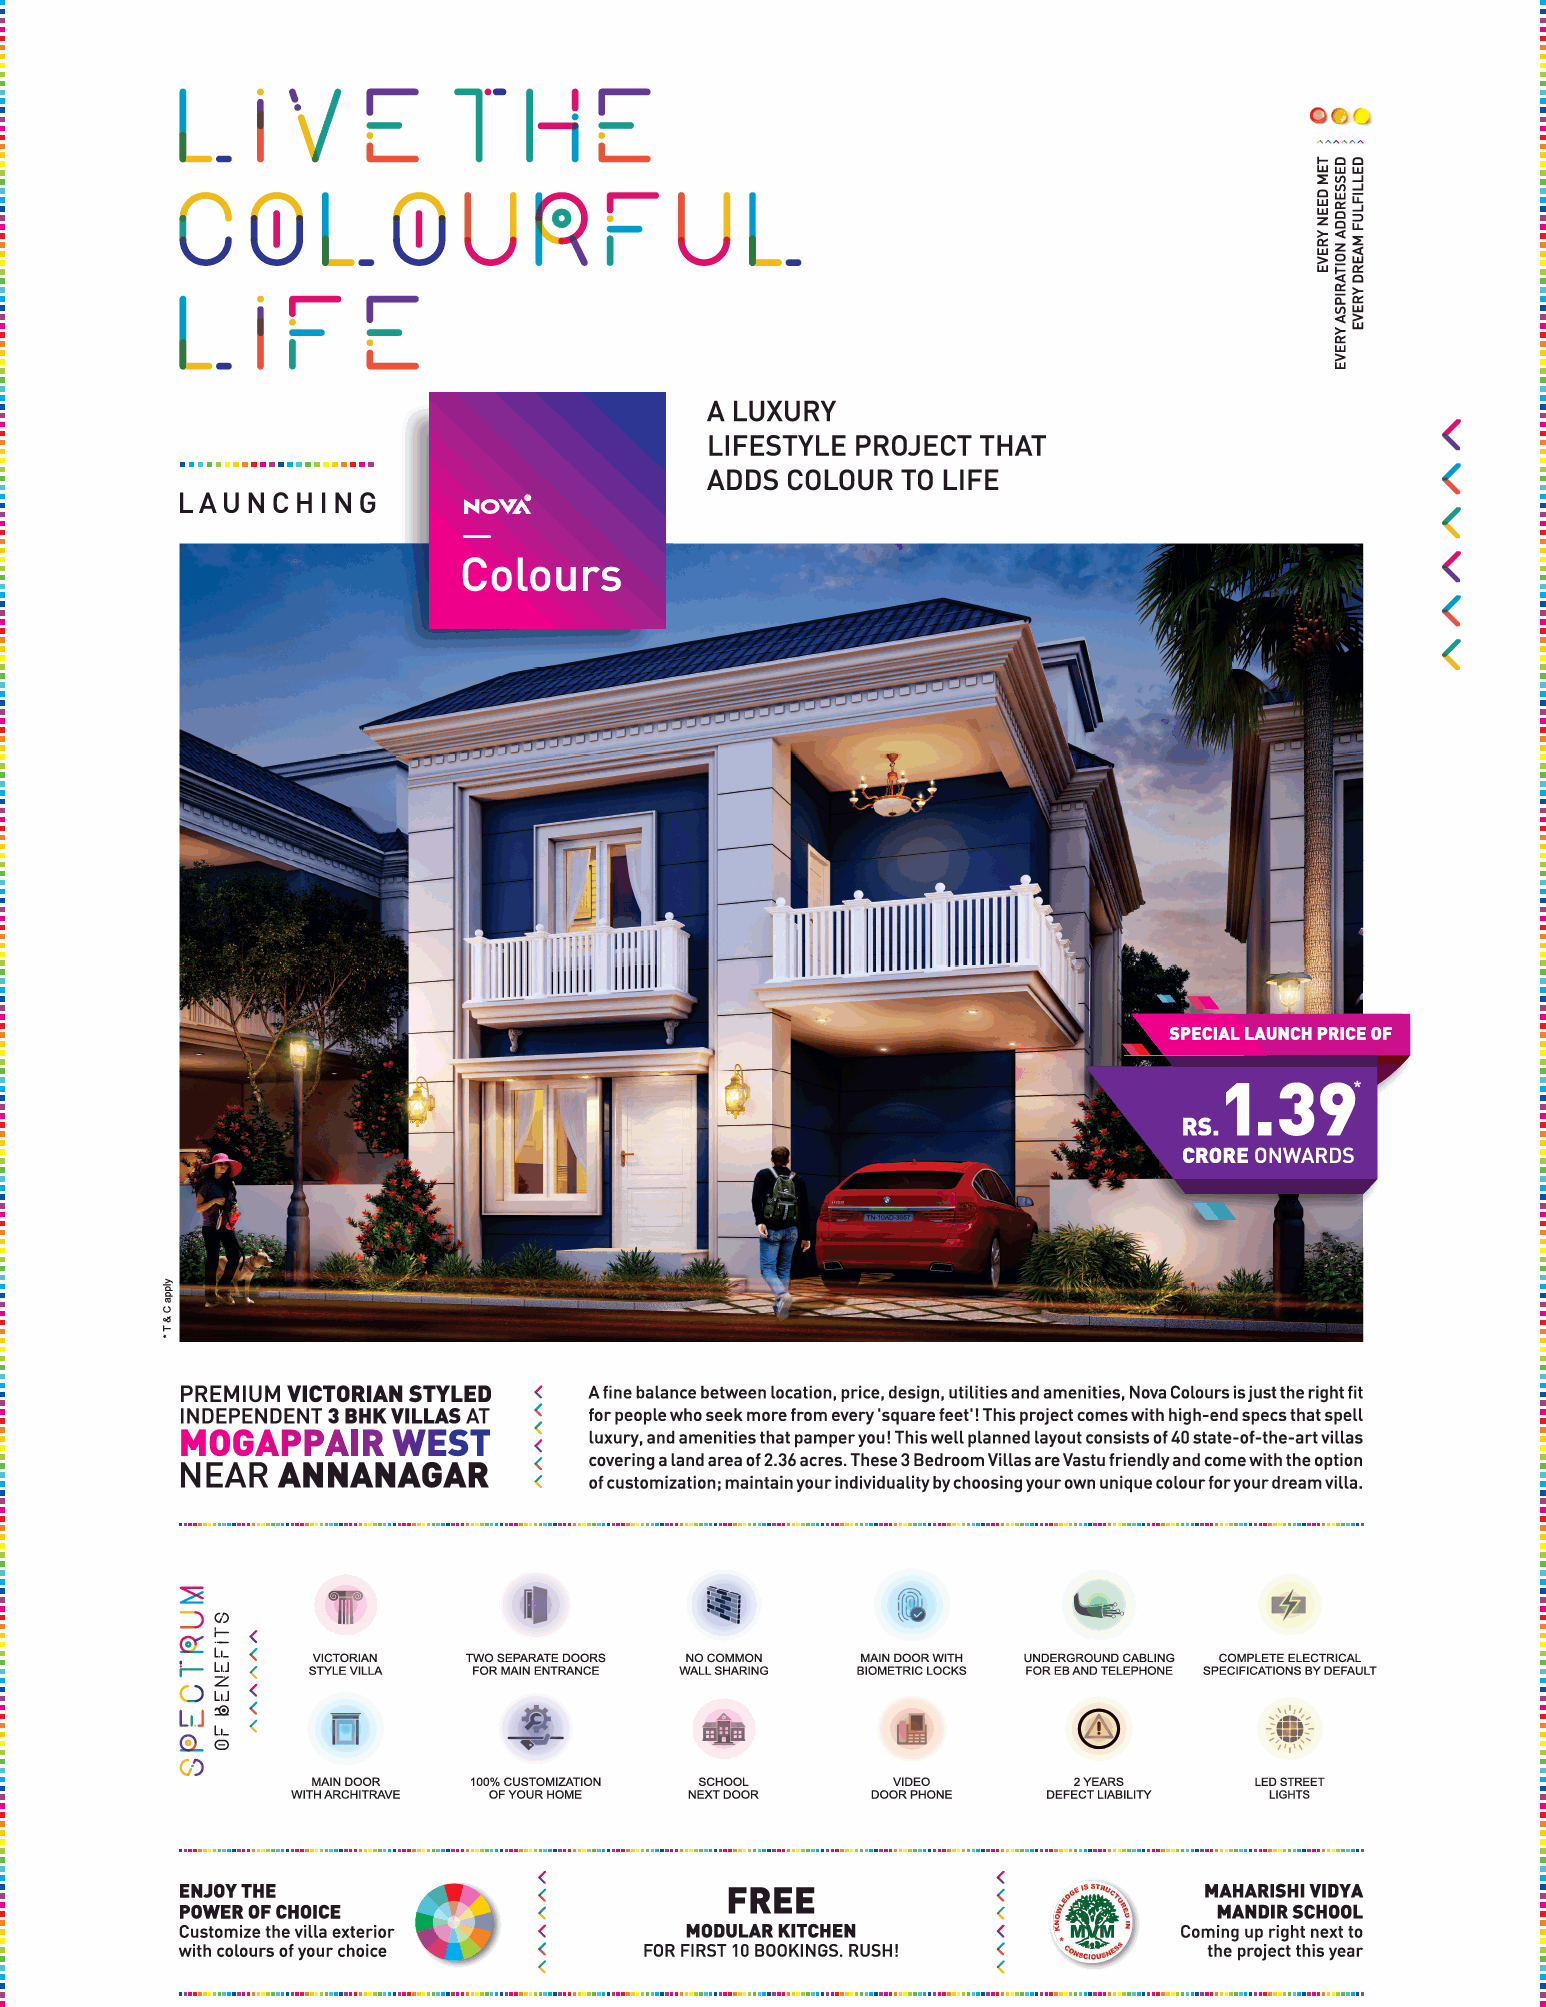 Launching premium victorian styled independent 3 bhk villa at Nova Colours in Chennai Update